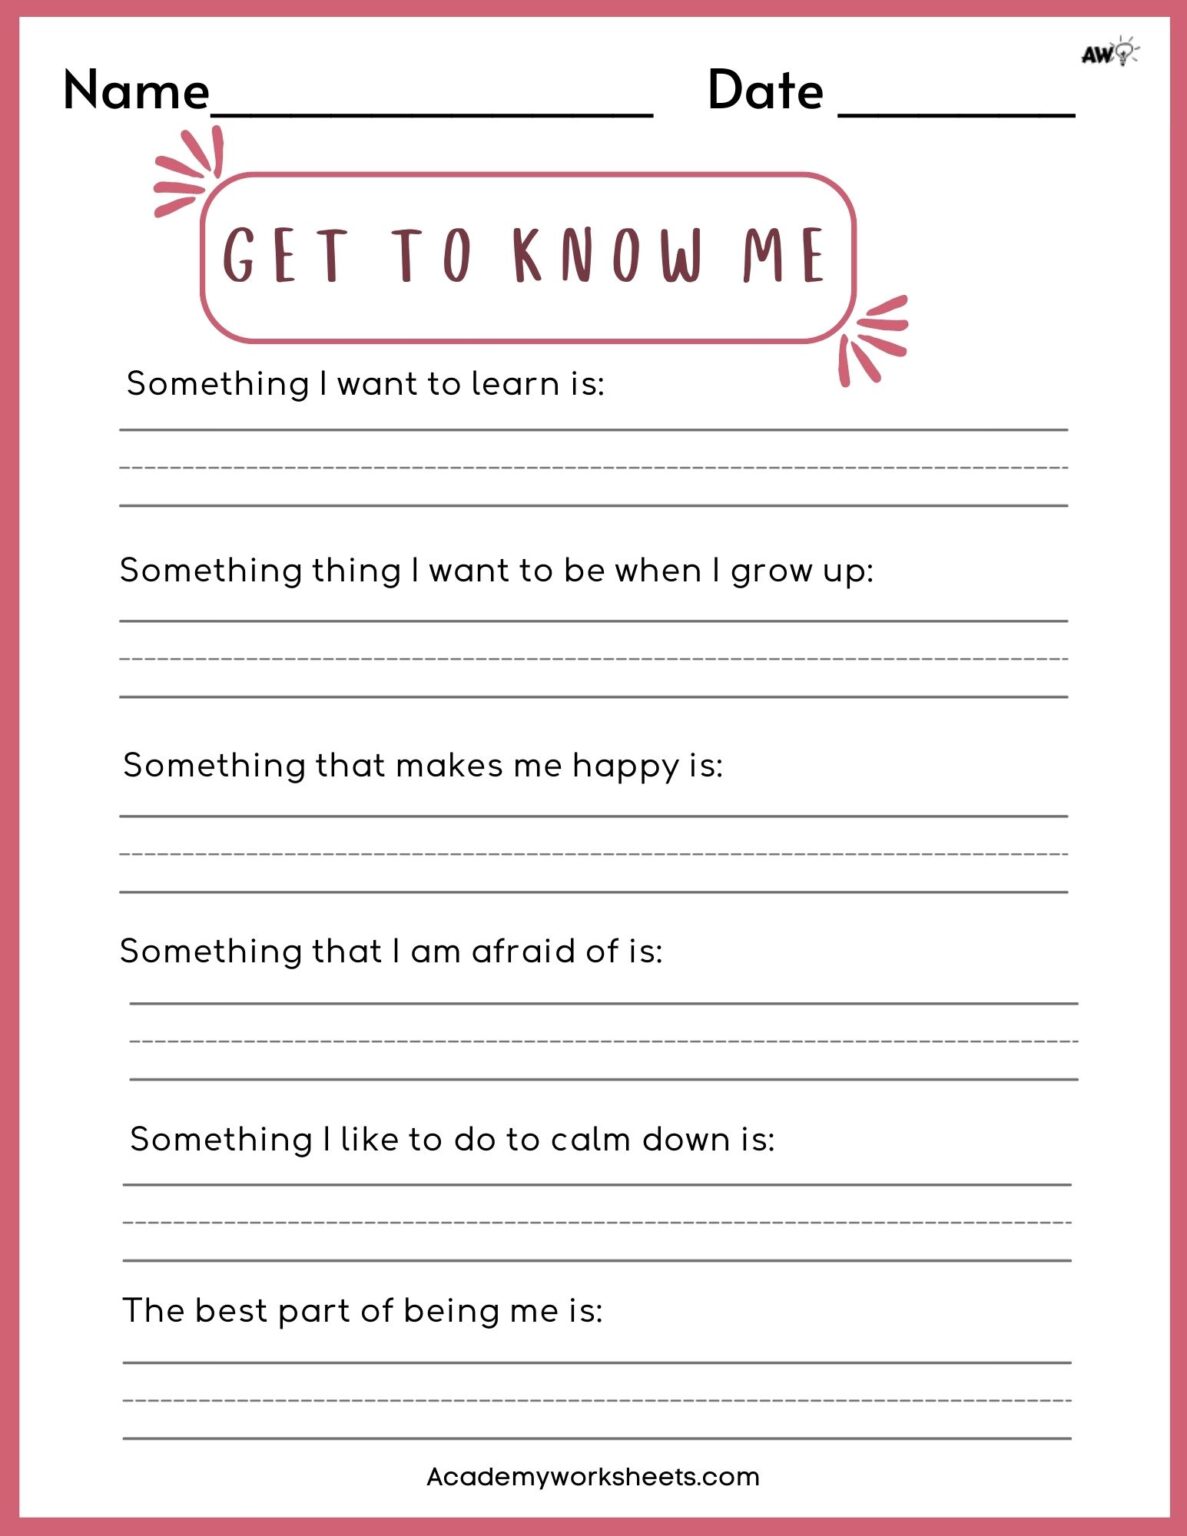 Top 7 'All About Me' Free Printable Worksheets for kindergarten ...